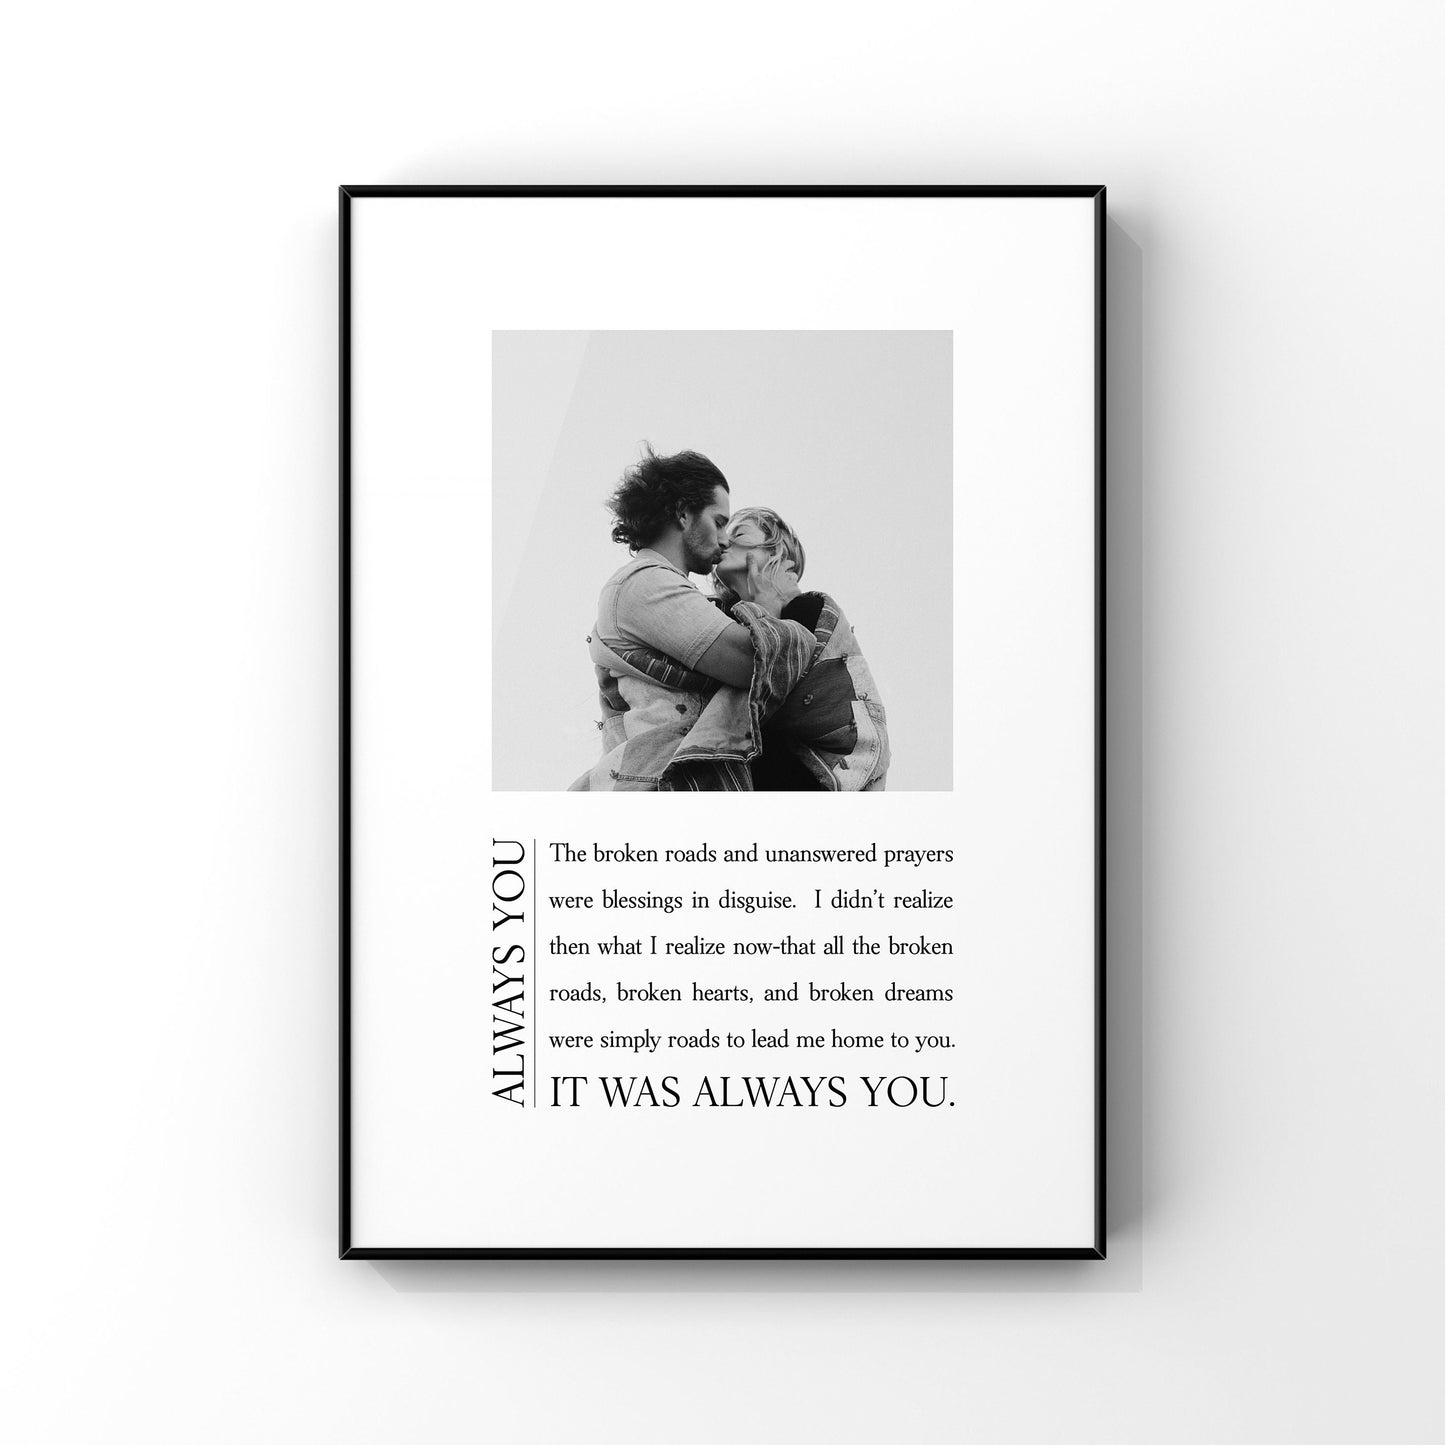 Custom always you,Personalized always you,Always you definition print,Anniversary photo gift,Gift for spouse,Customized photo gift